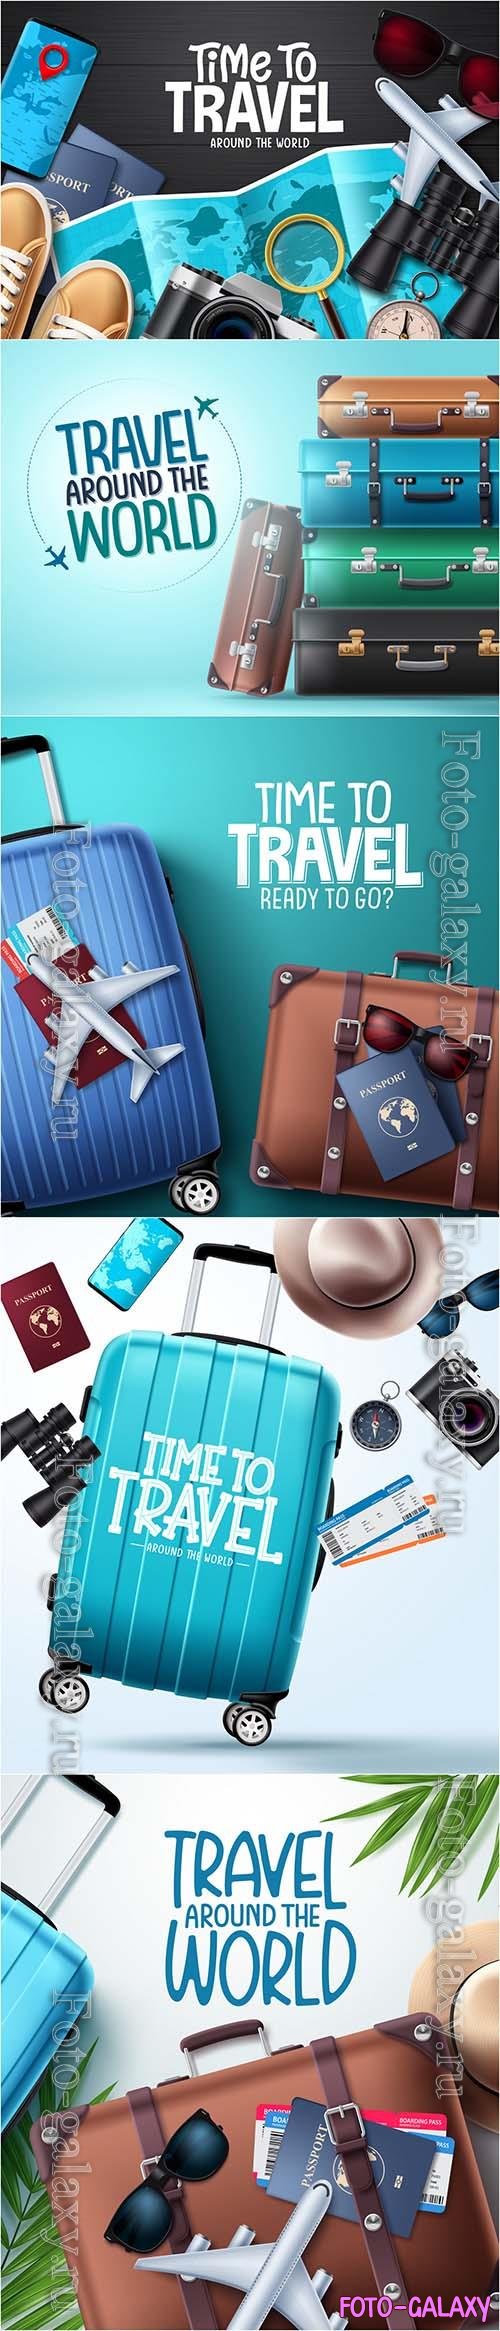 Time to travel vector illustrations